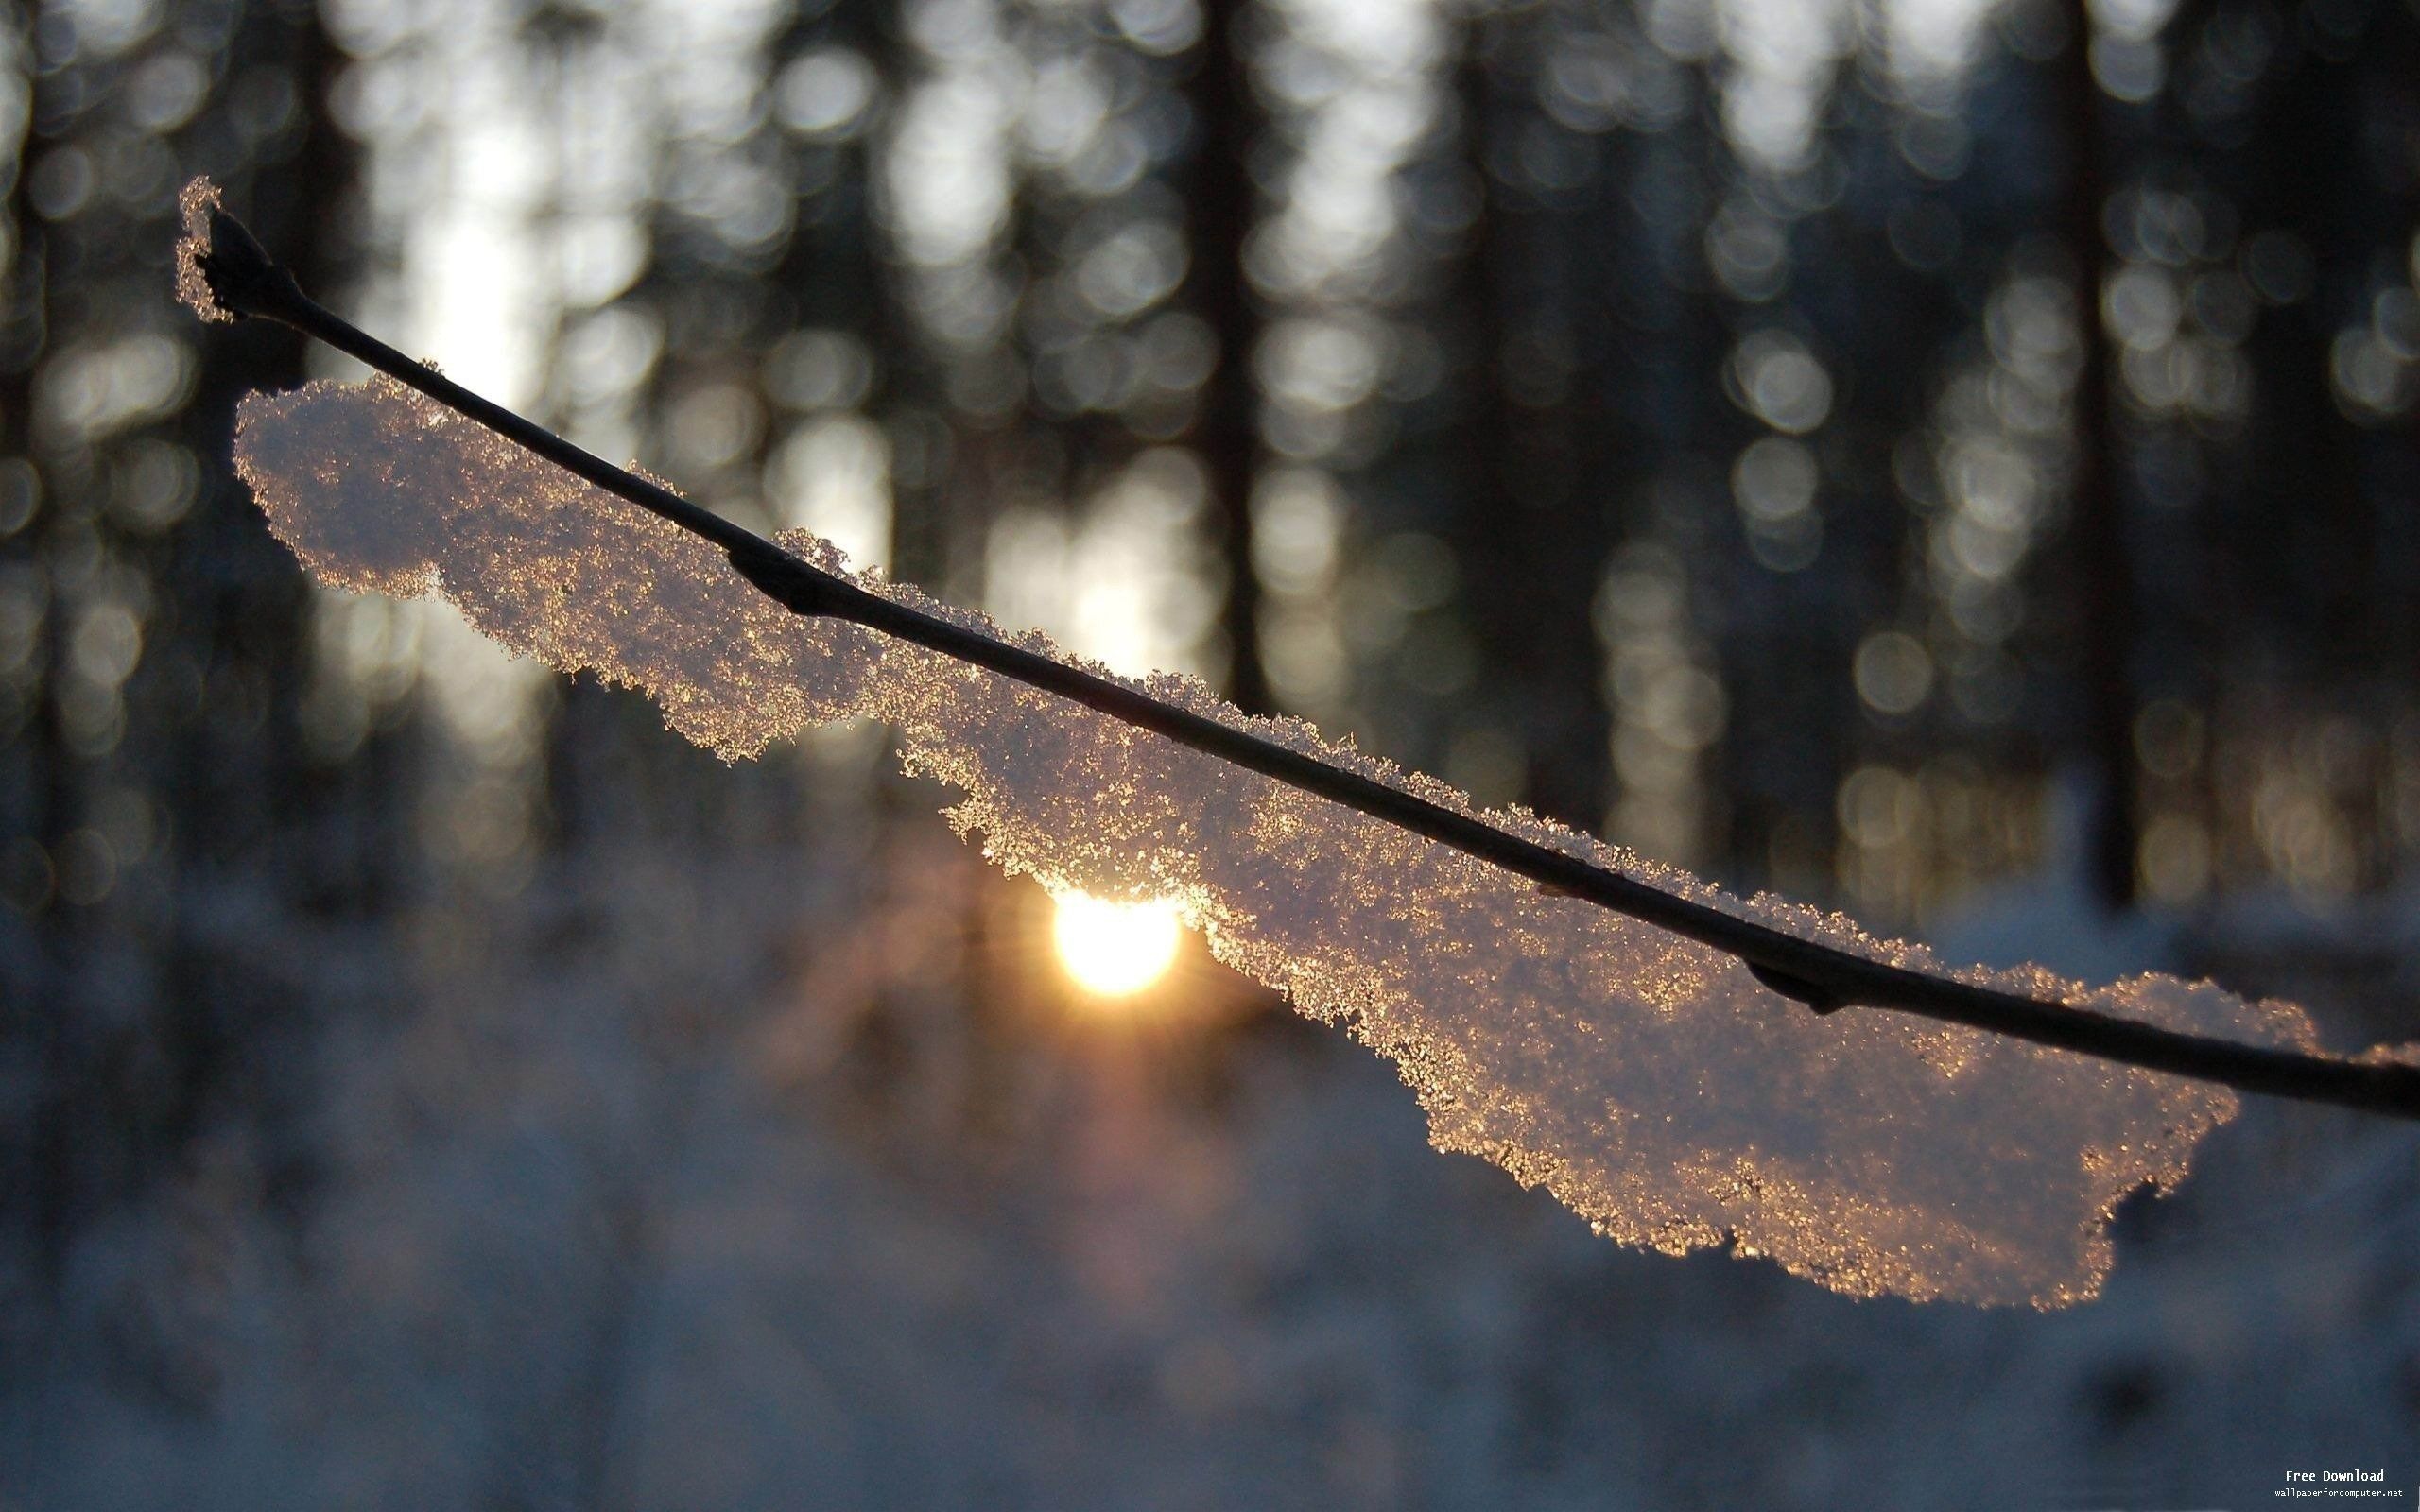 A branch covered in snow, with the sun shining through it. - Warm